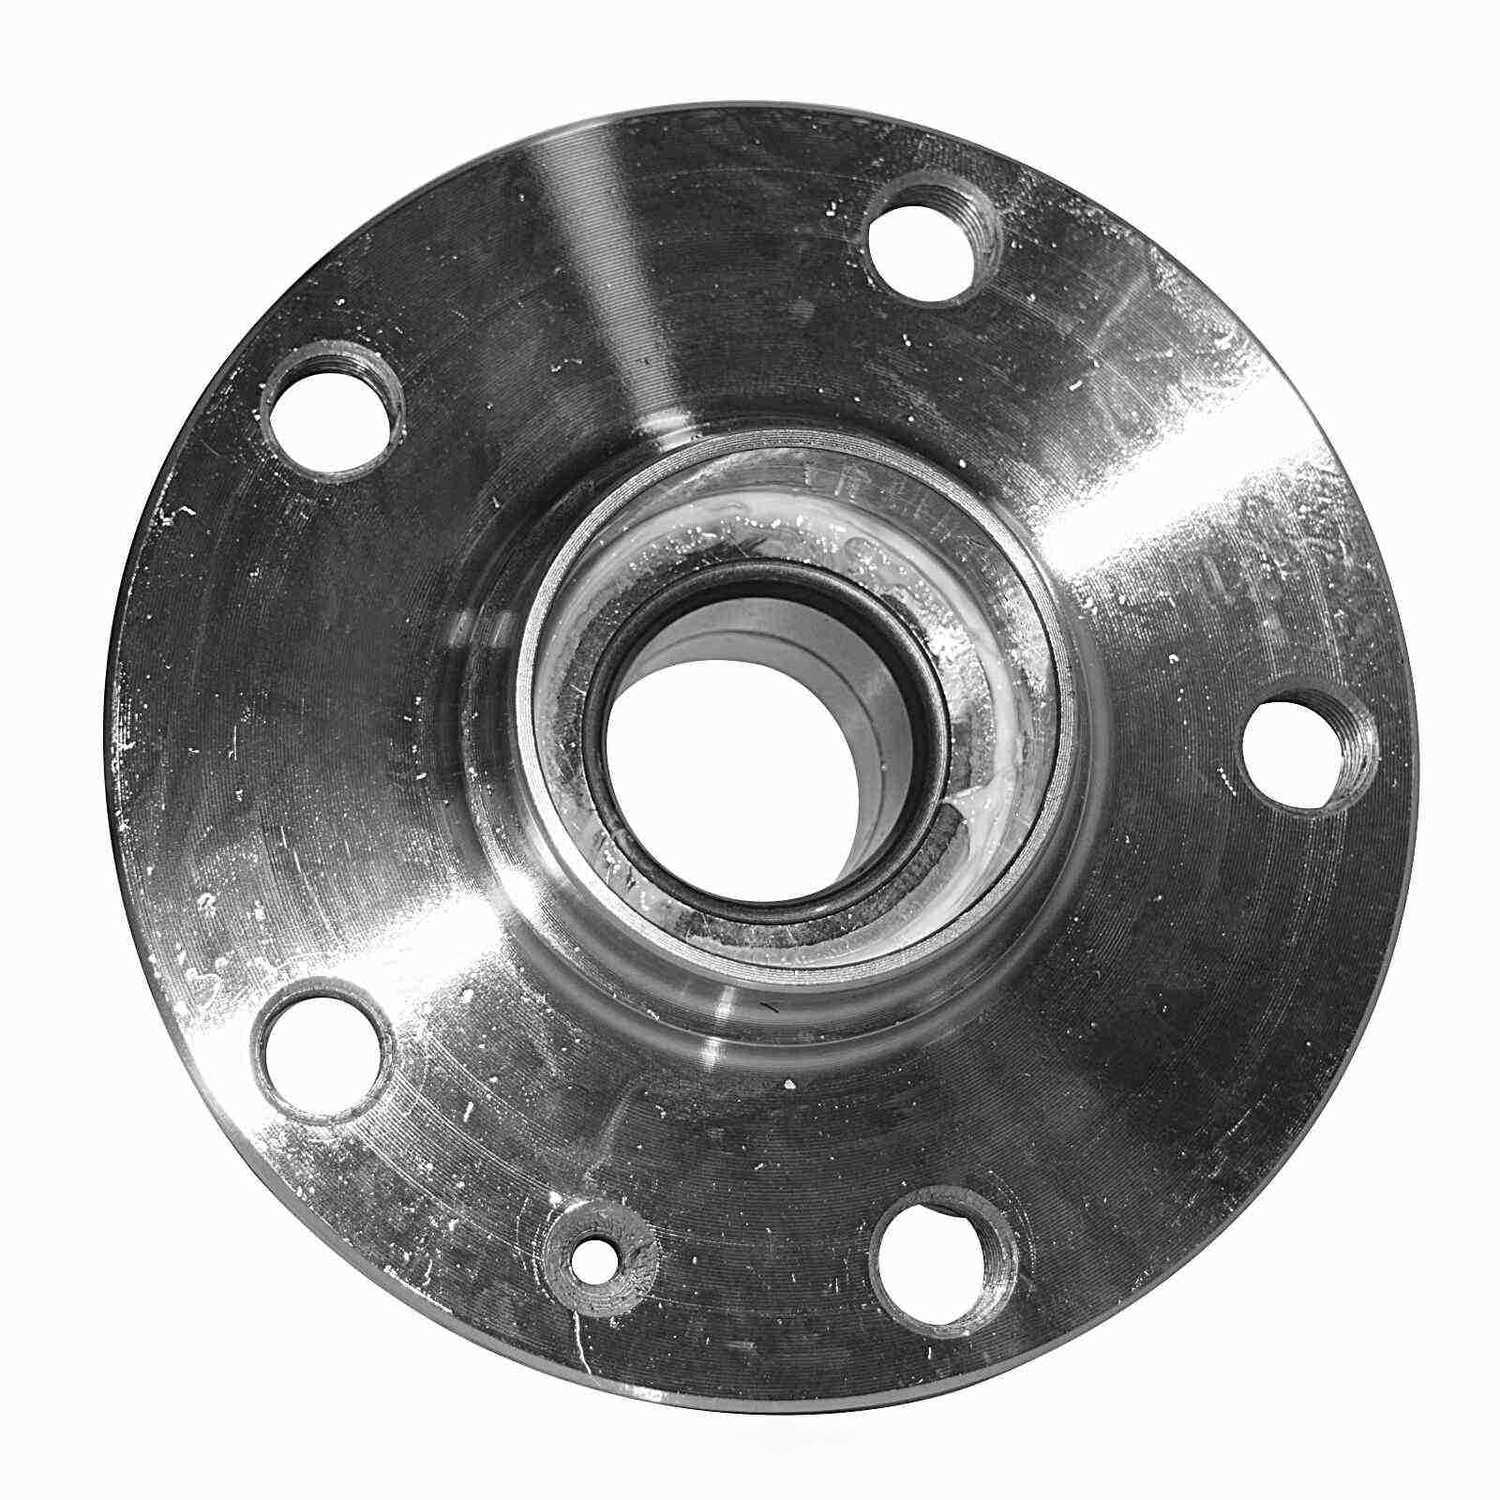 GSP NORTH AMERICA INC. - GSP Axle Bearing & Hub Assembly - AD8 233319